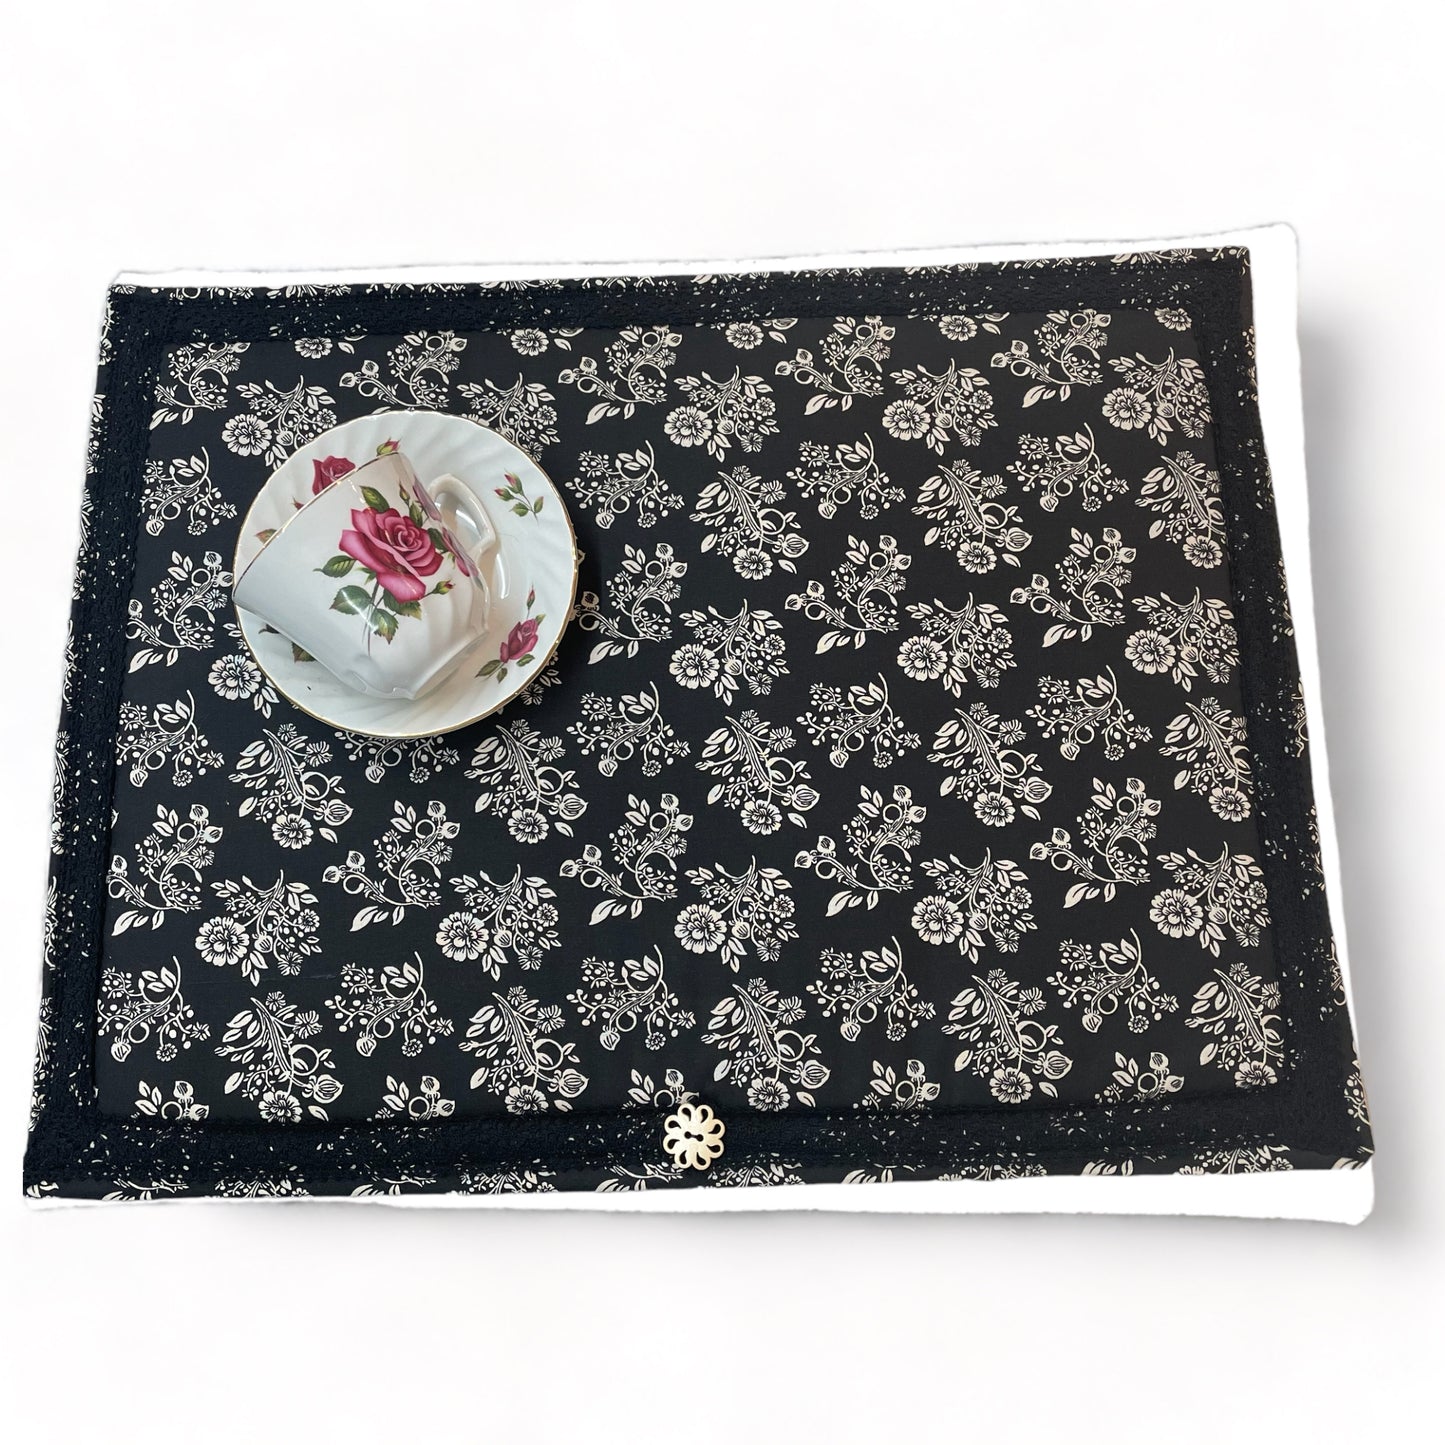 Handmade Cream and Black Vintage Floral Print Dish Mat with Lace Trim - Farmhouse Chic